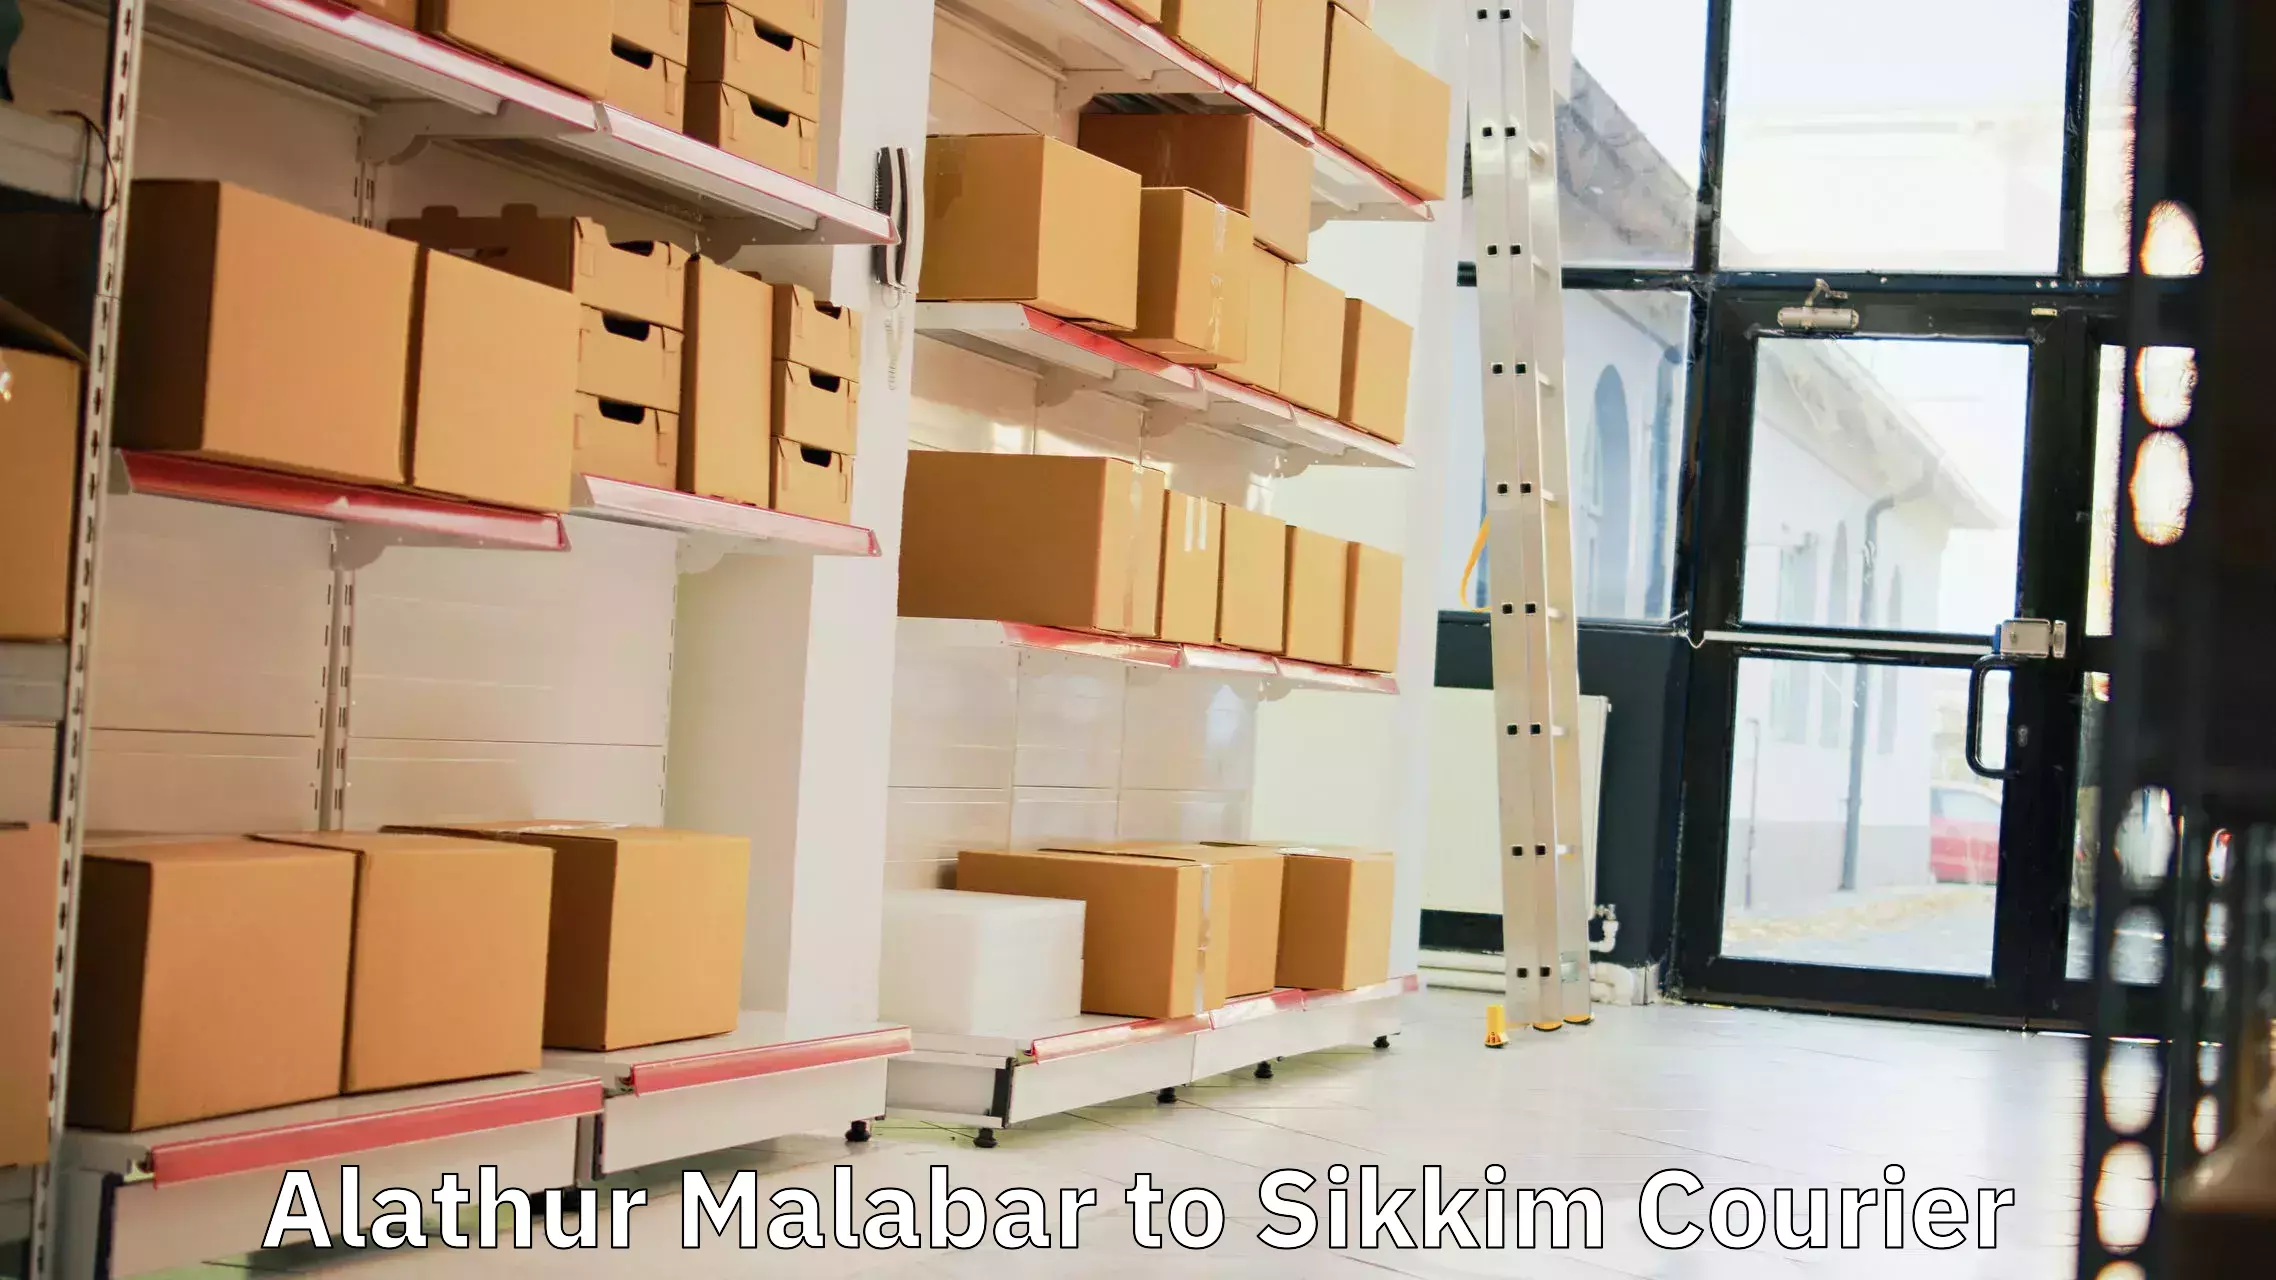 Streamlined delivery processes in Alathur Malabar to Sikkim